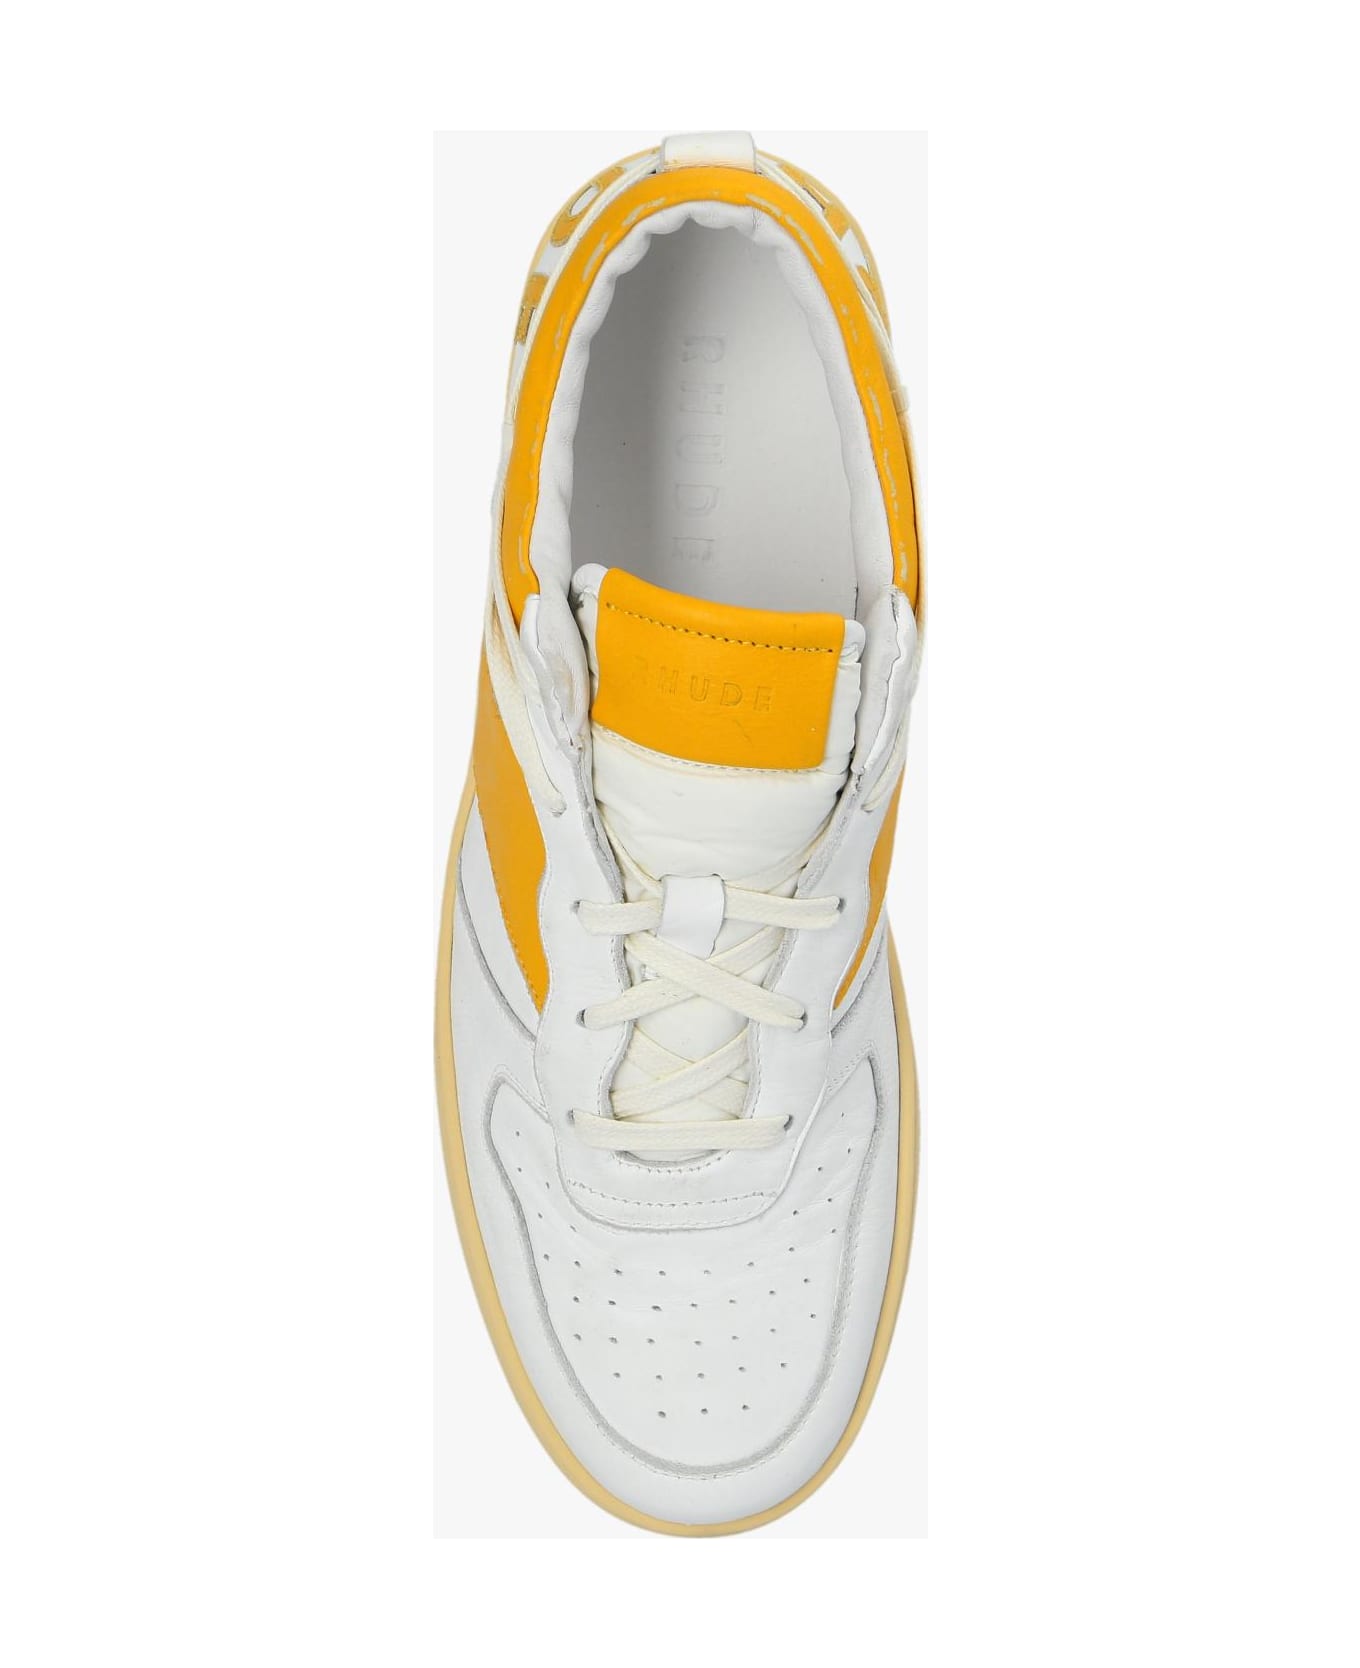 Rhude Sneakers With Logo - WHITE/YELLOW